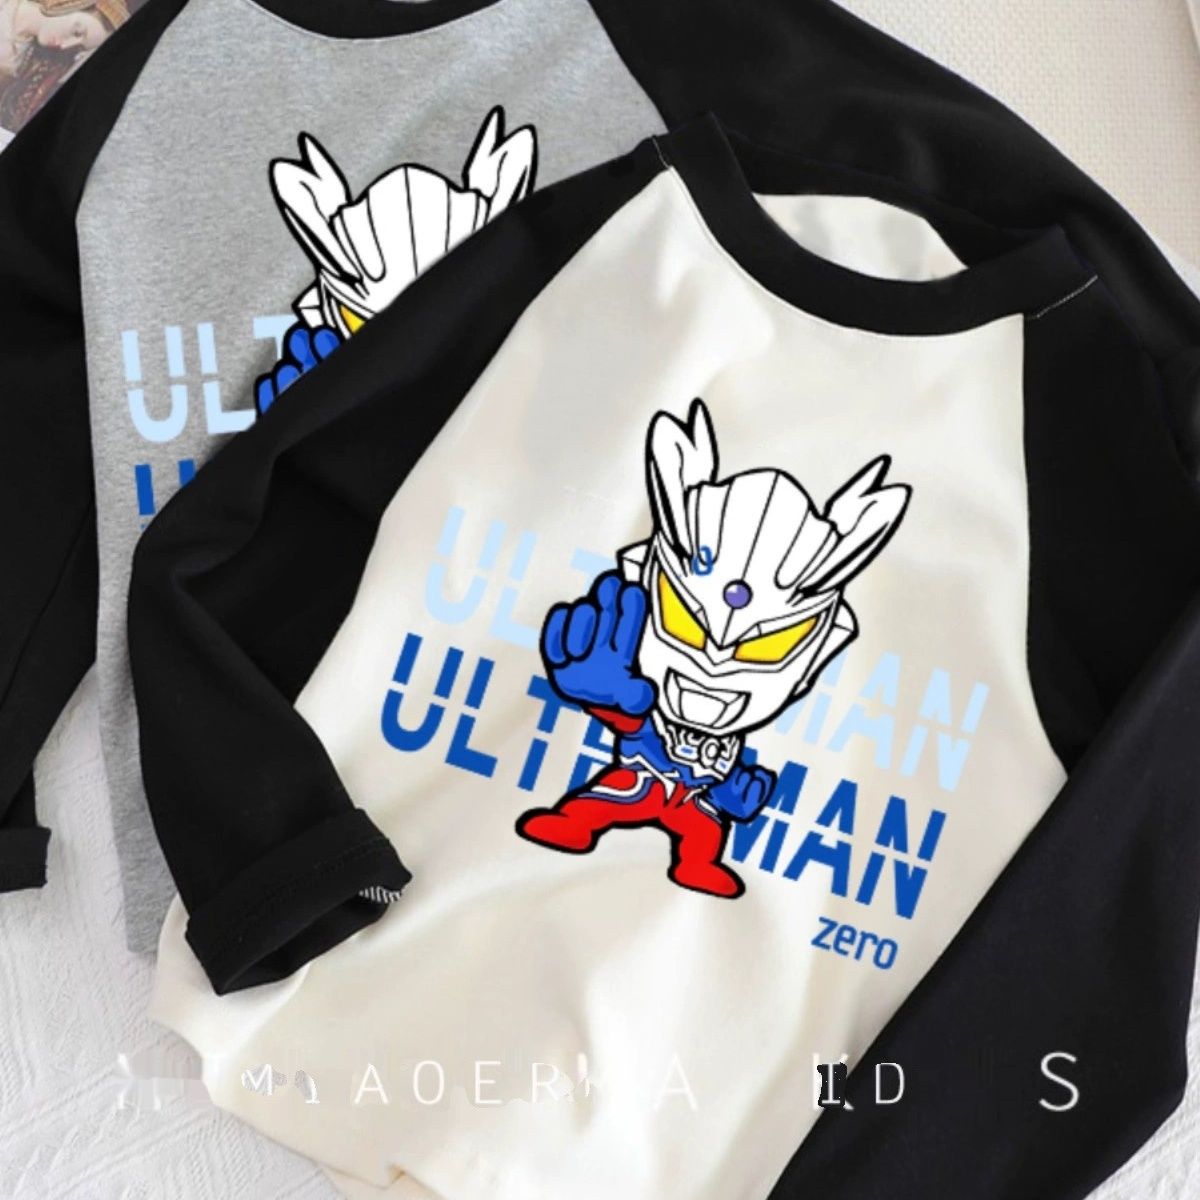 100% cotton boys' children's clothing bottoming shirt spring and autumn 2023 Ultraman Superman small and medium children's top long-sleeved T-shirt